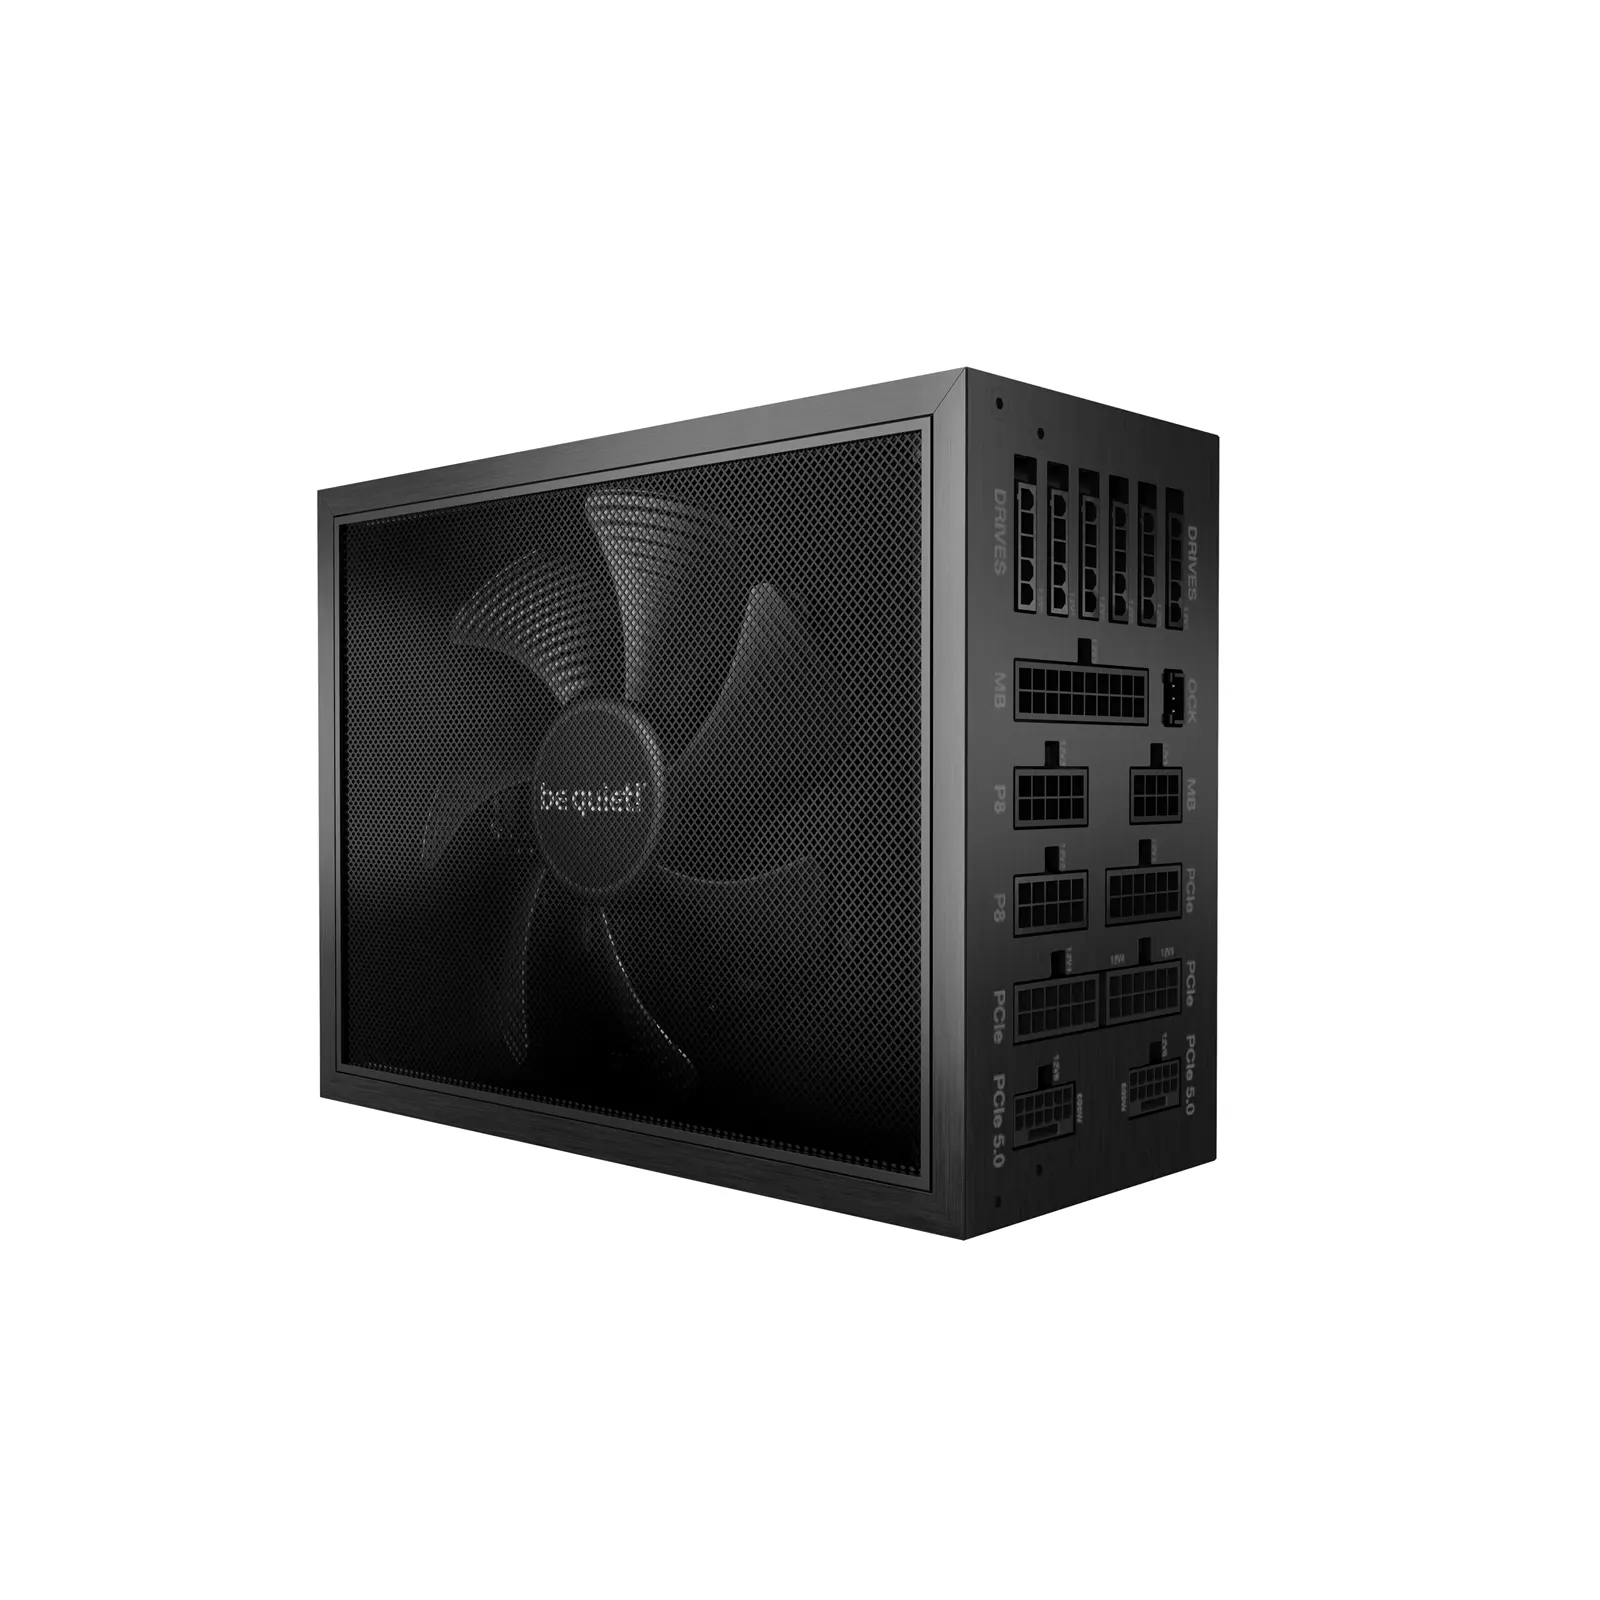 be quiet! Dark Power Pro 13 1300W PSU, 80 PLUS Titanium, ATX 3.0 PSU with full support for PCIe 5.0 GPUs and GPUs with 6+2 pin connectors, 10-year manufacturer’s warranty